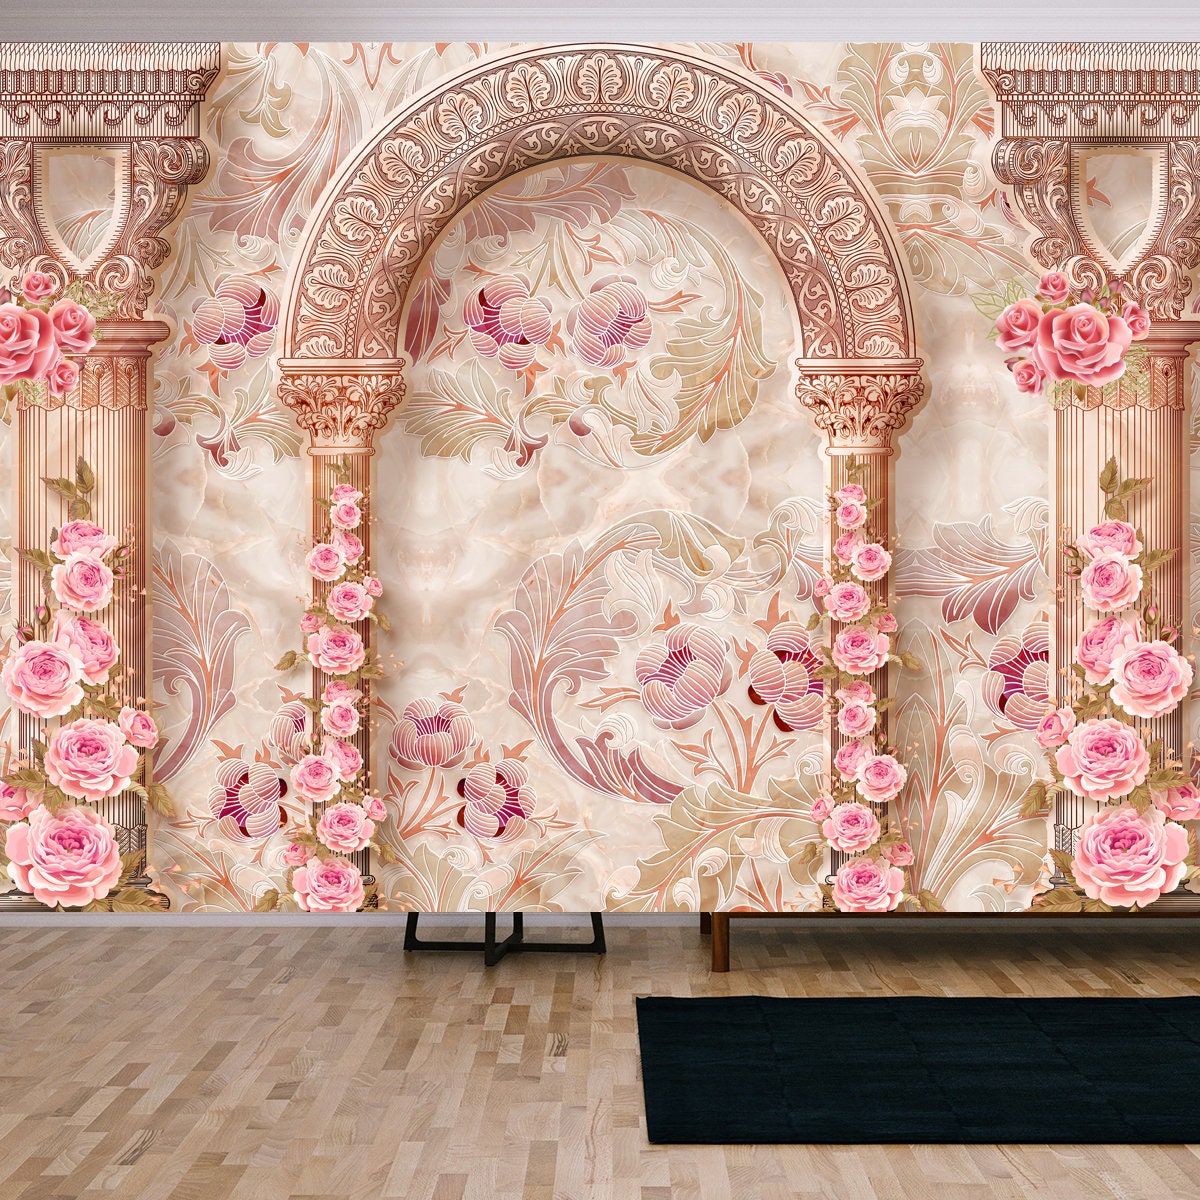 3d Wallpaper Marble Pattern Columns with Beautiful Pink Flowers Wallpaper Living Room Mural